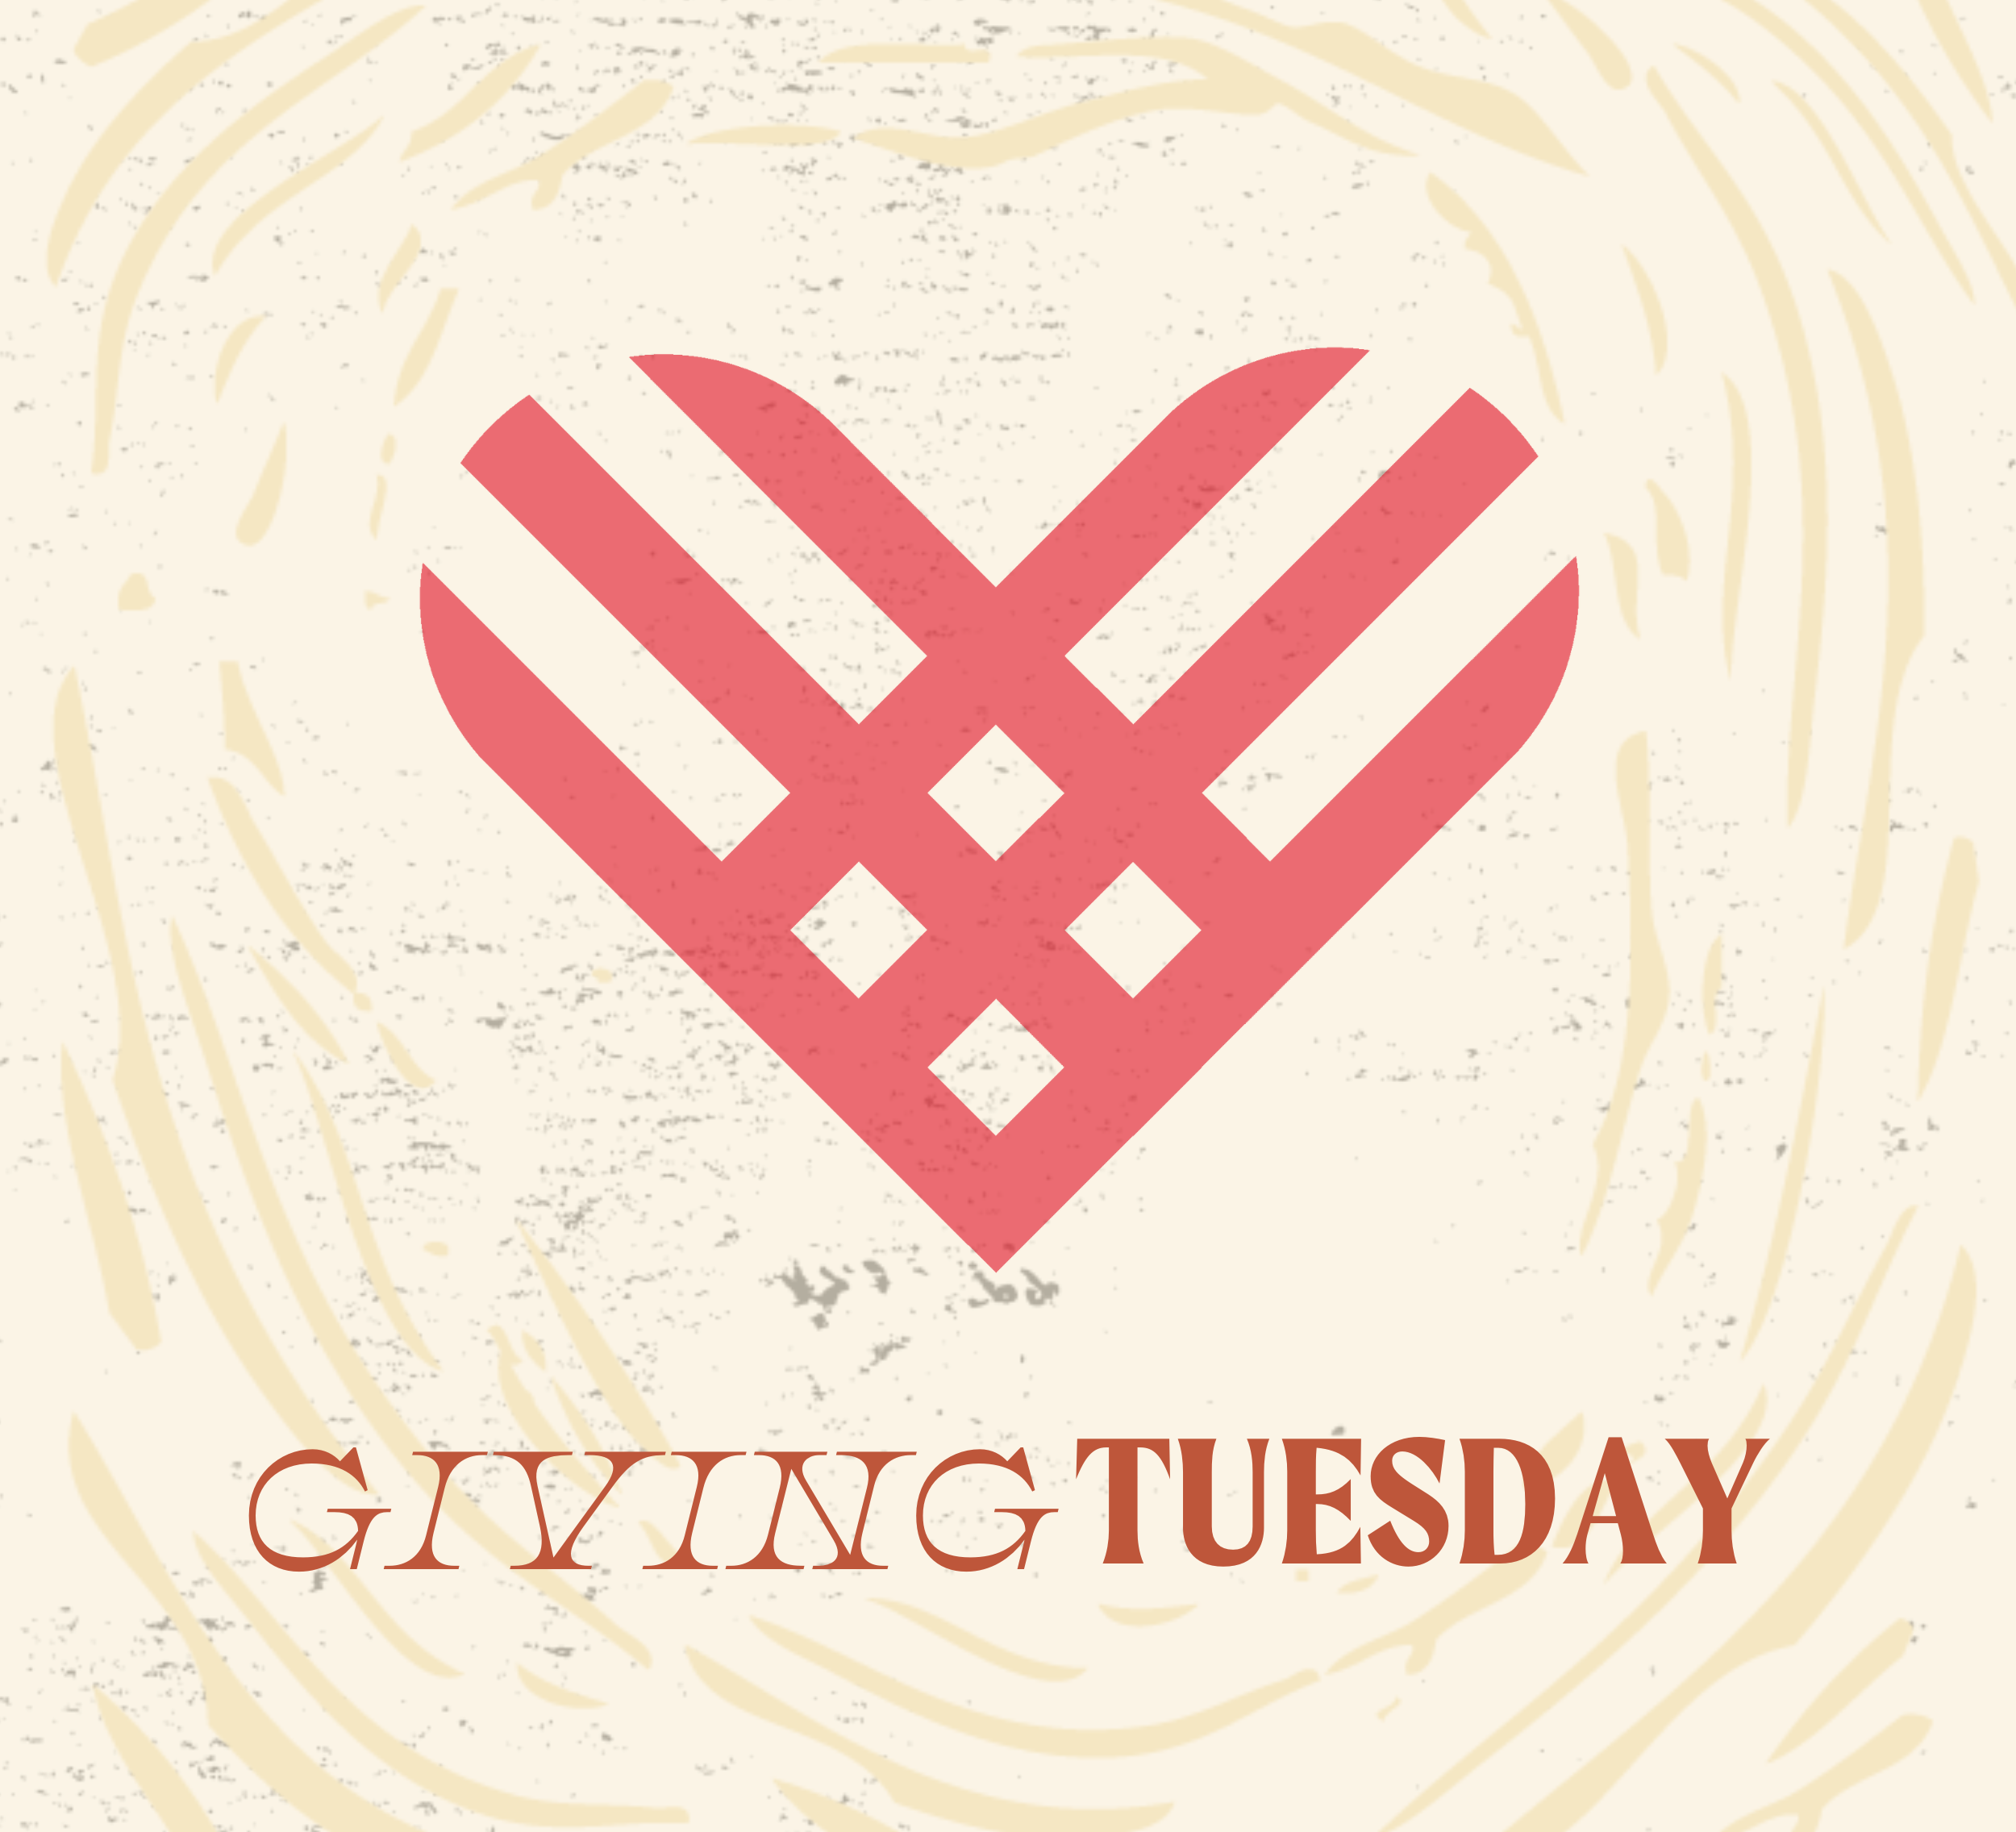 Outdoor Nonprofits And Organizations To Support This Giving Tuesday